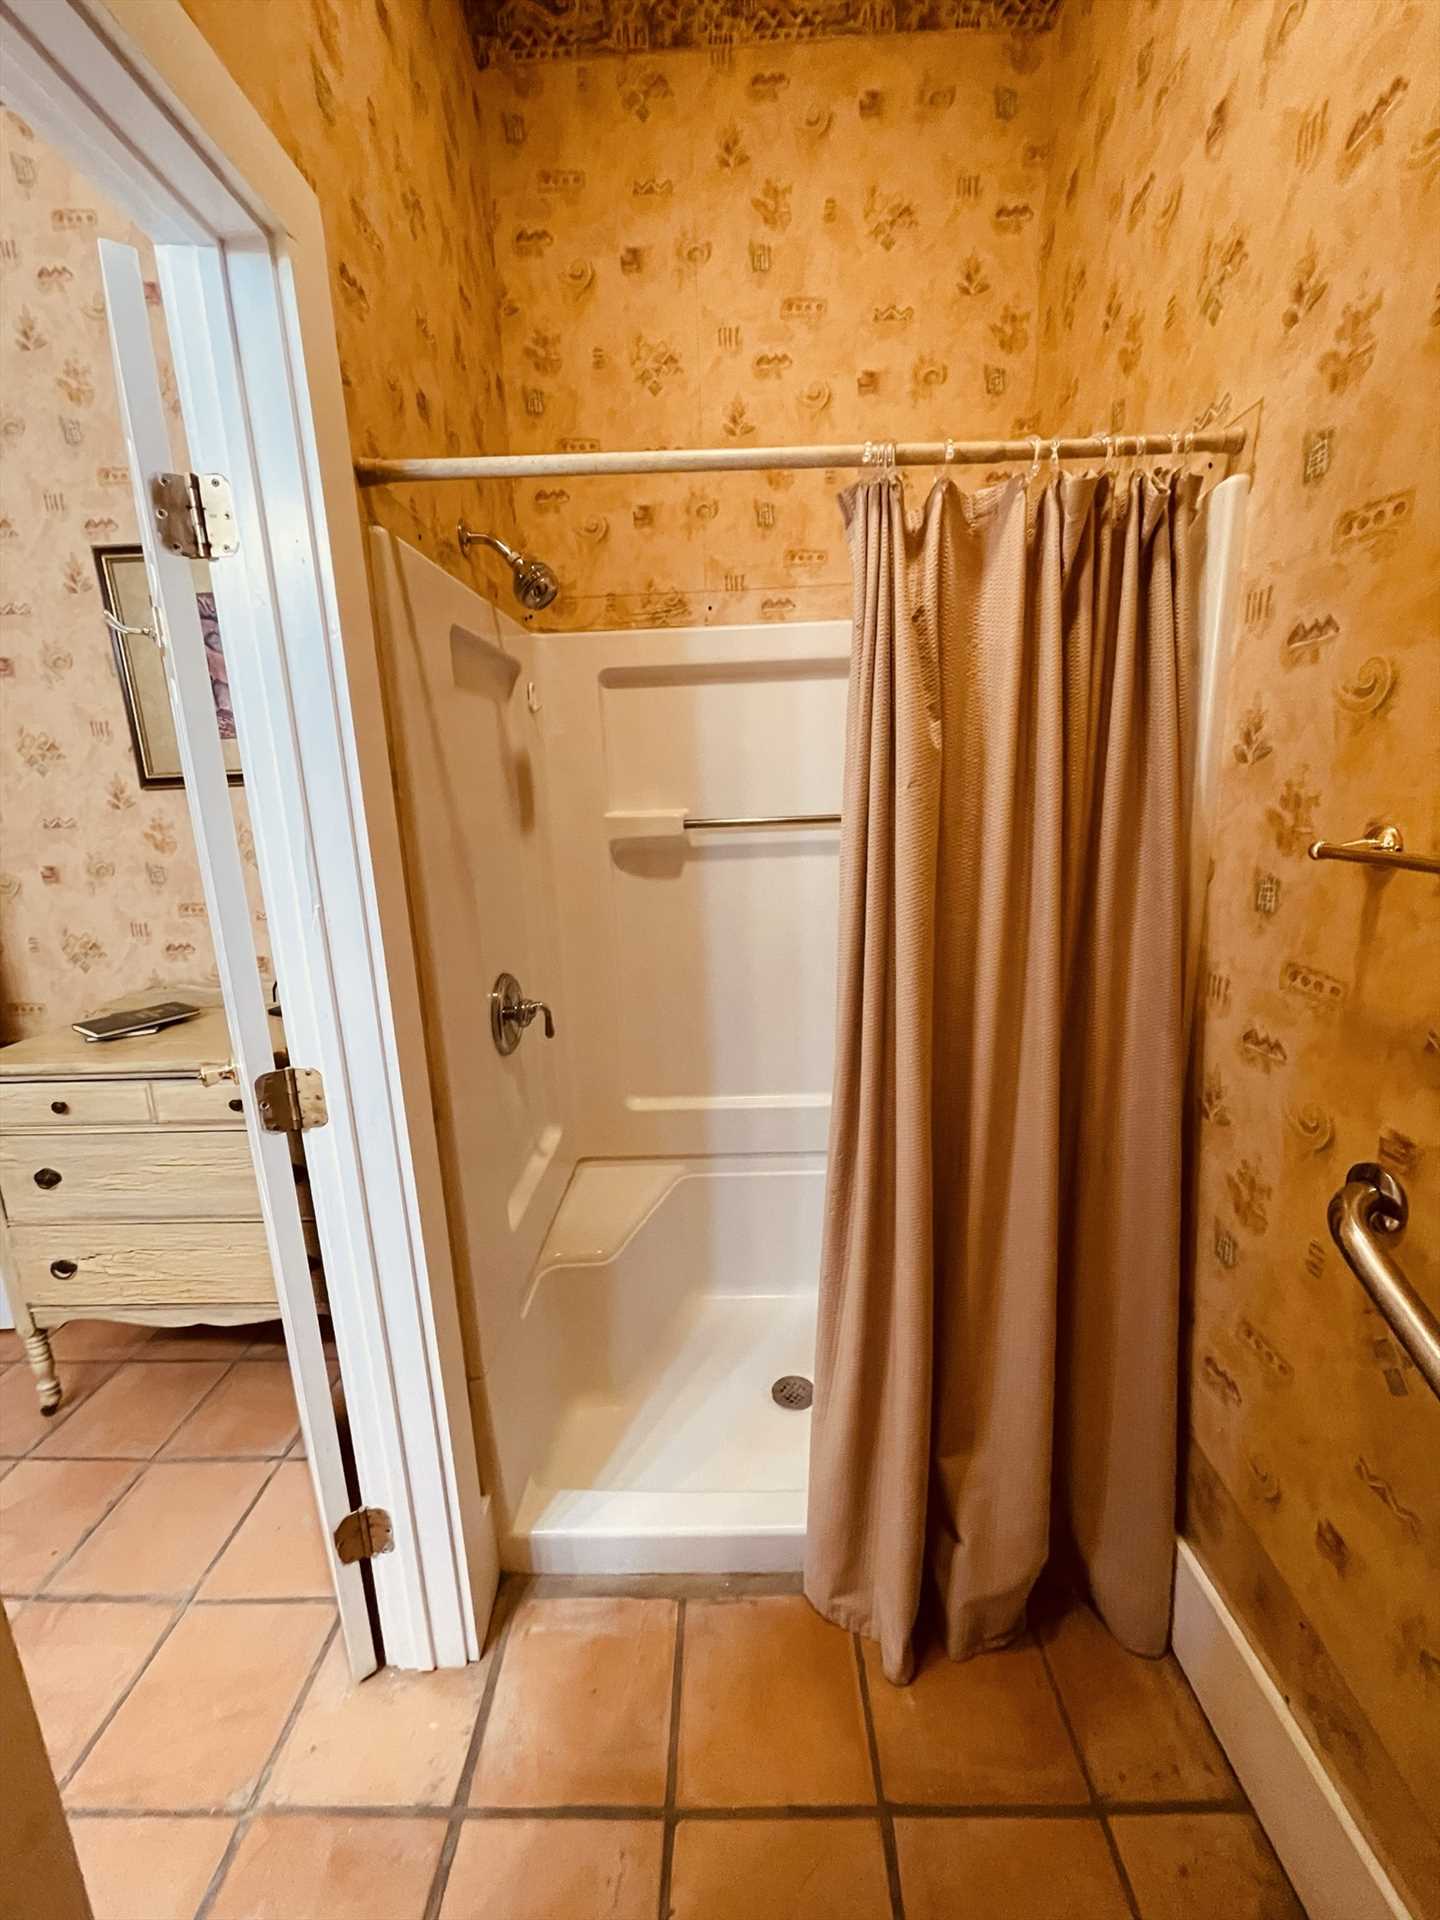                                                 The Lodge at D'Hanis has three spotless full bathrooms, all of which include showers, clean linens and basic toiletries are also included!